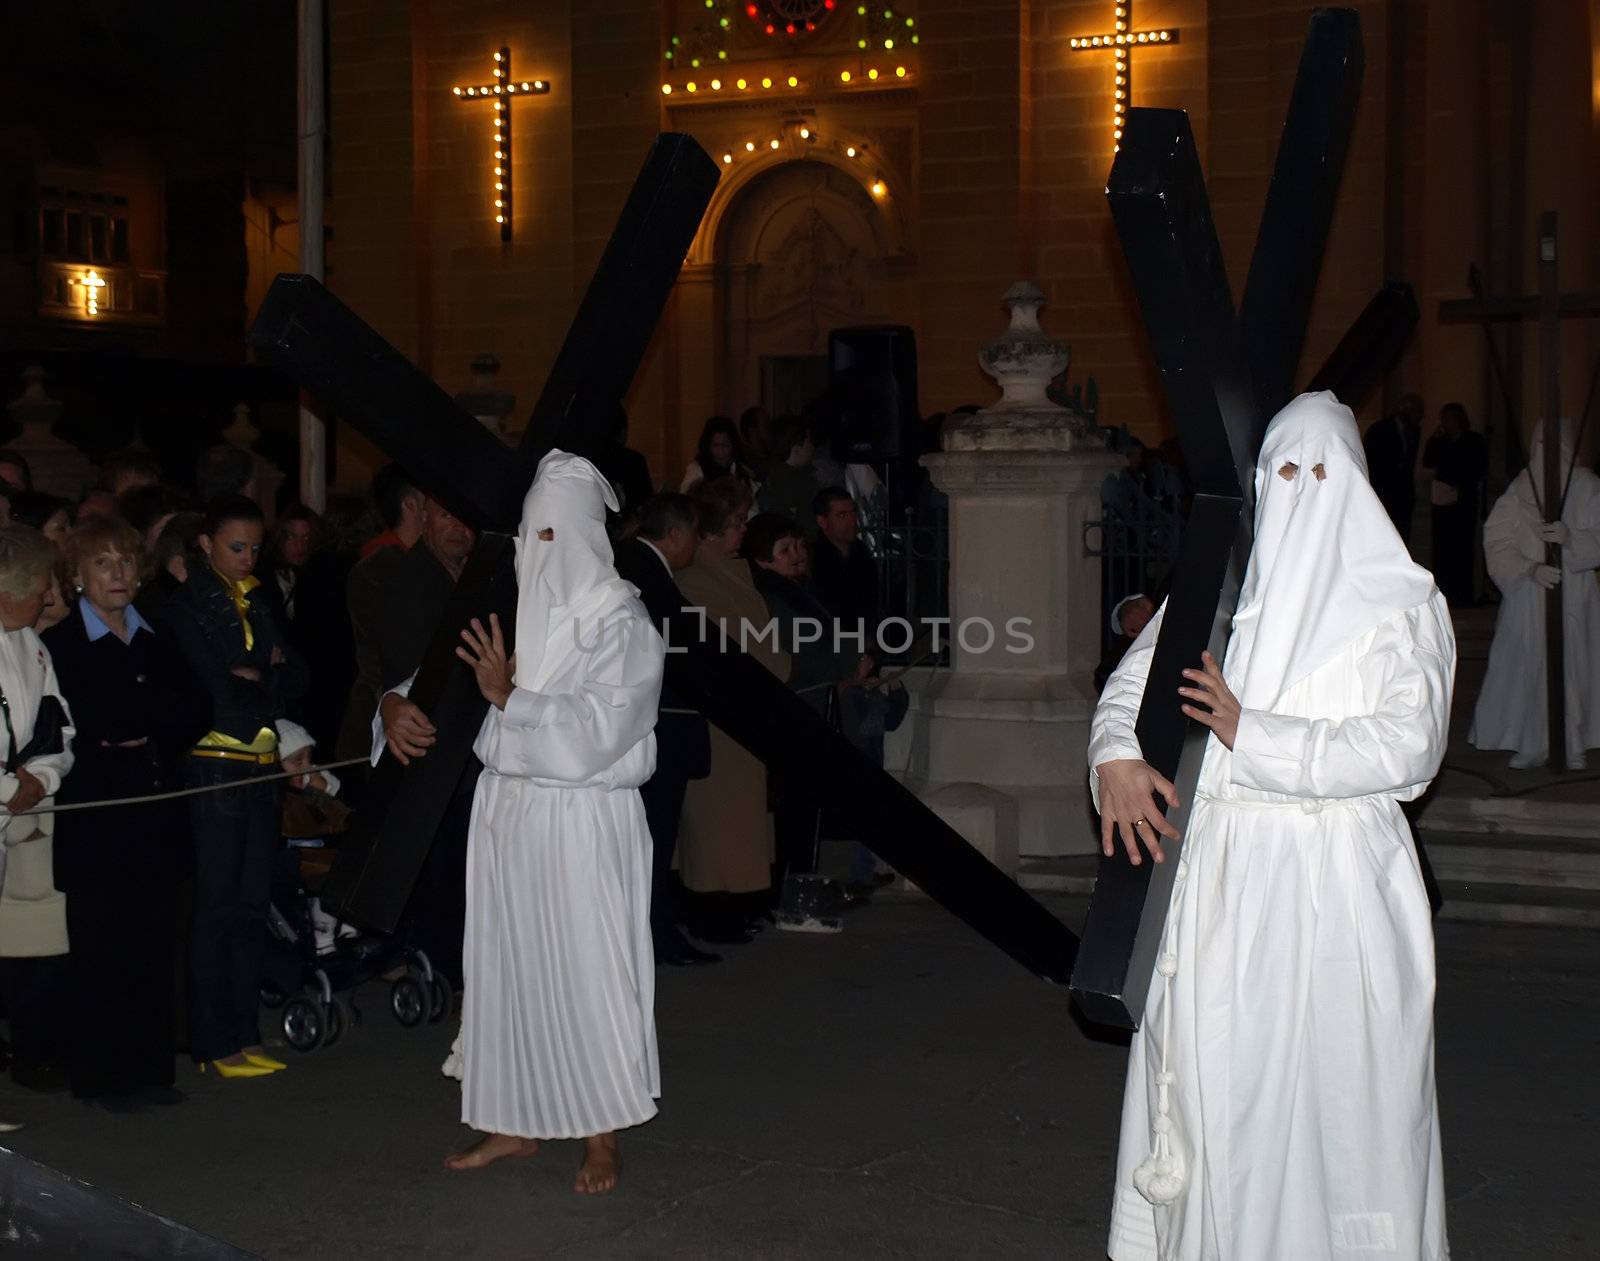 Various Biblical figures from the passion of the Christ during the good Friday procession in Luqa in Malta  